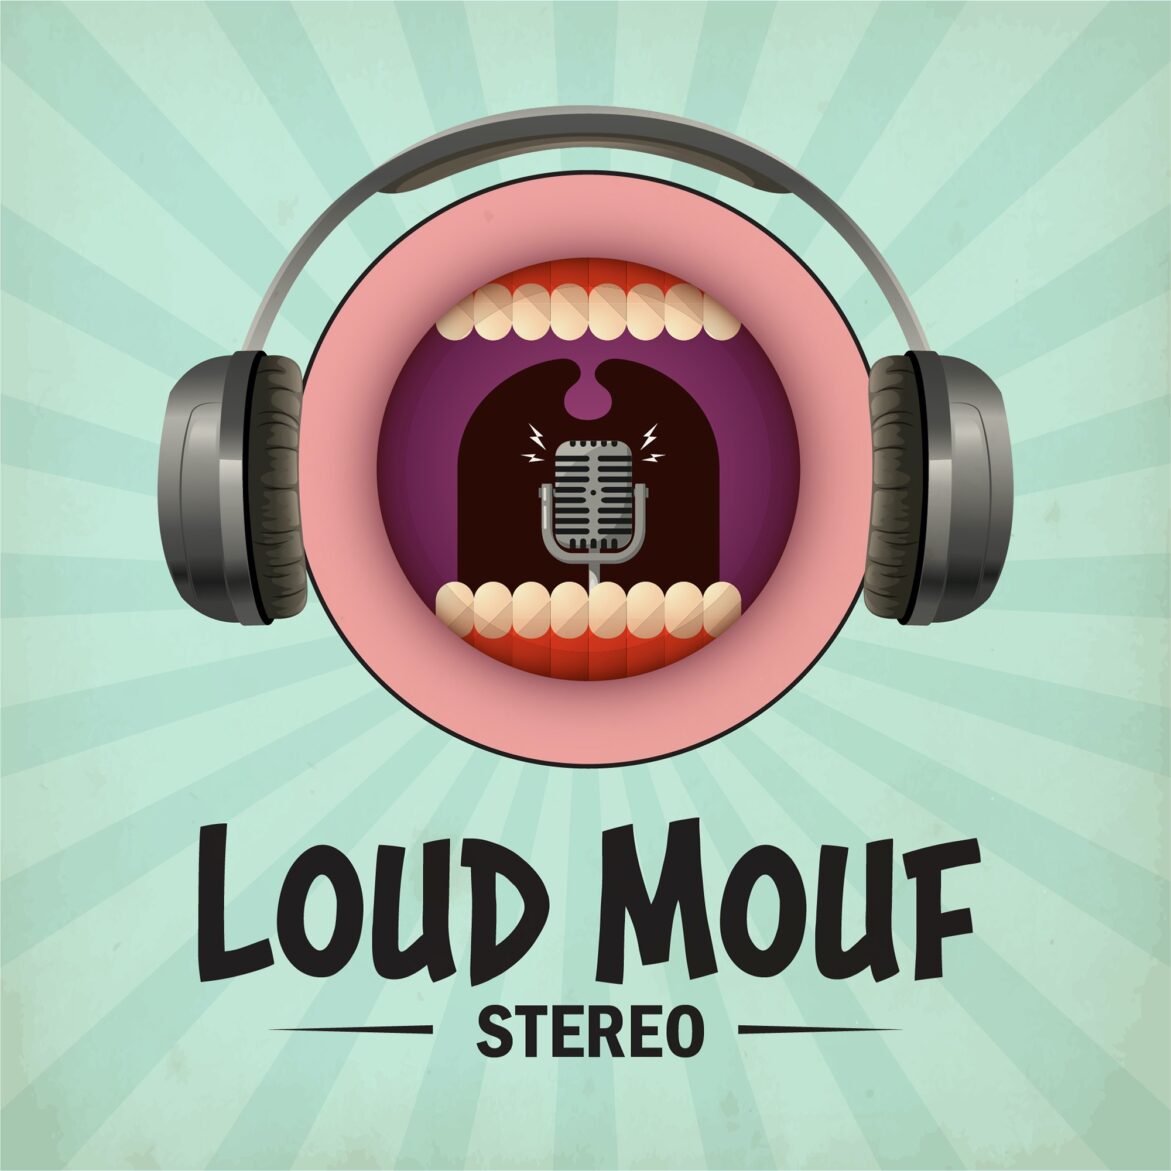 Black Podcasting - 286: Loud Mouf Stereo - Does Social Media Empower or Objectify Women?